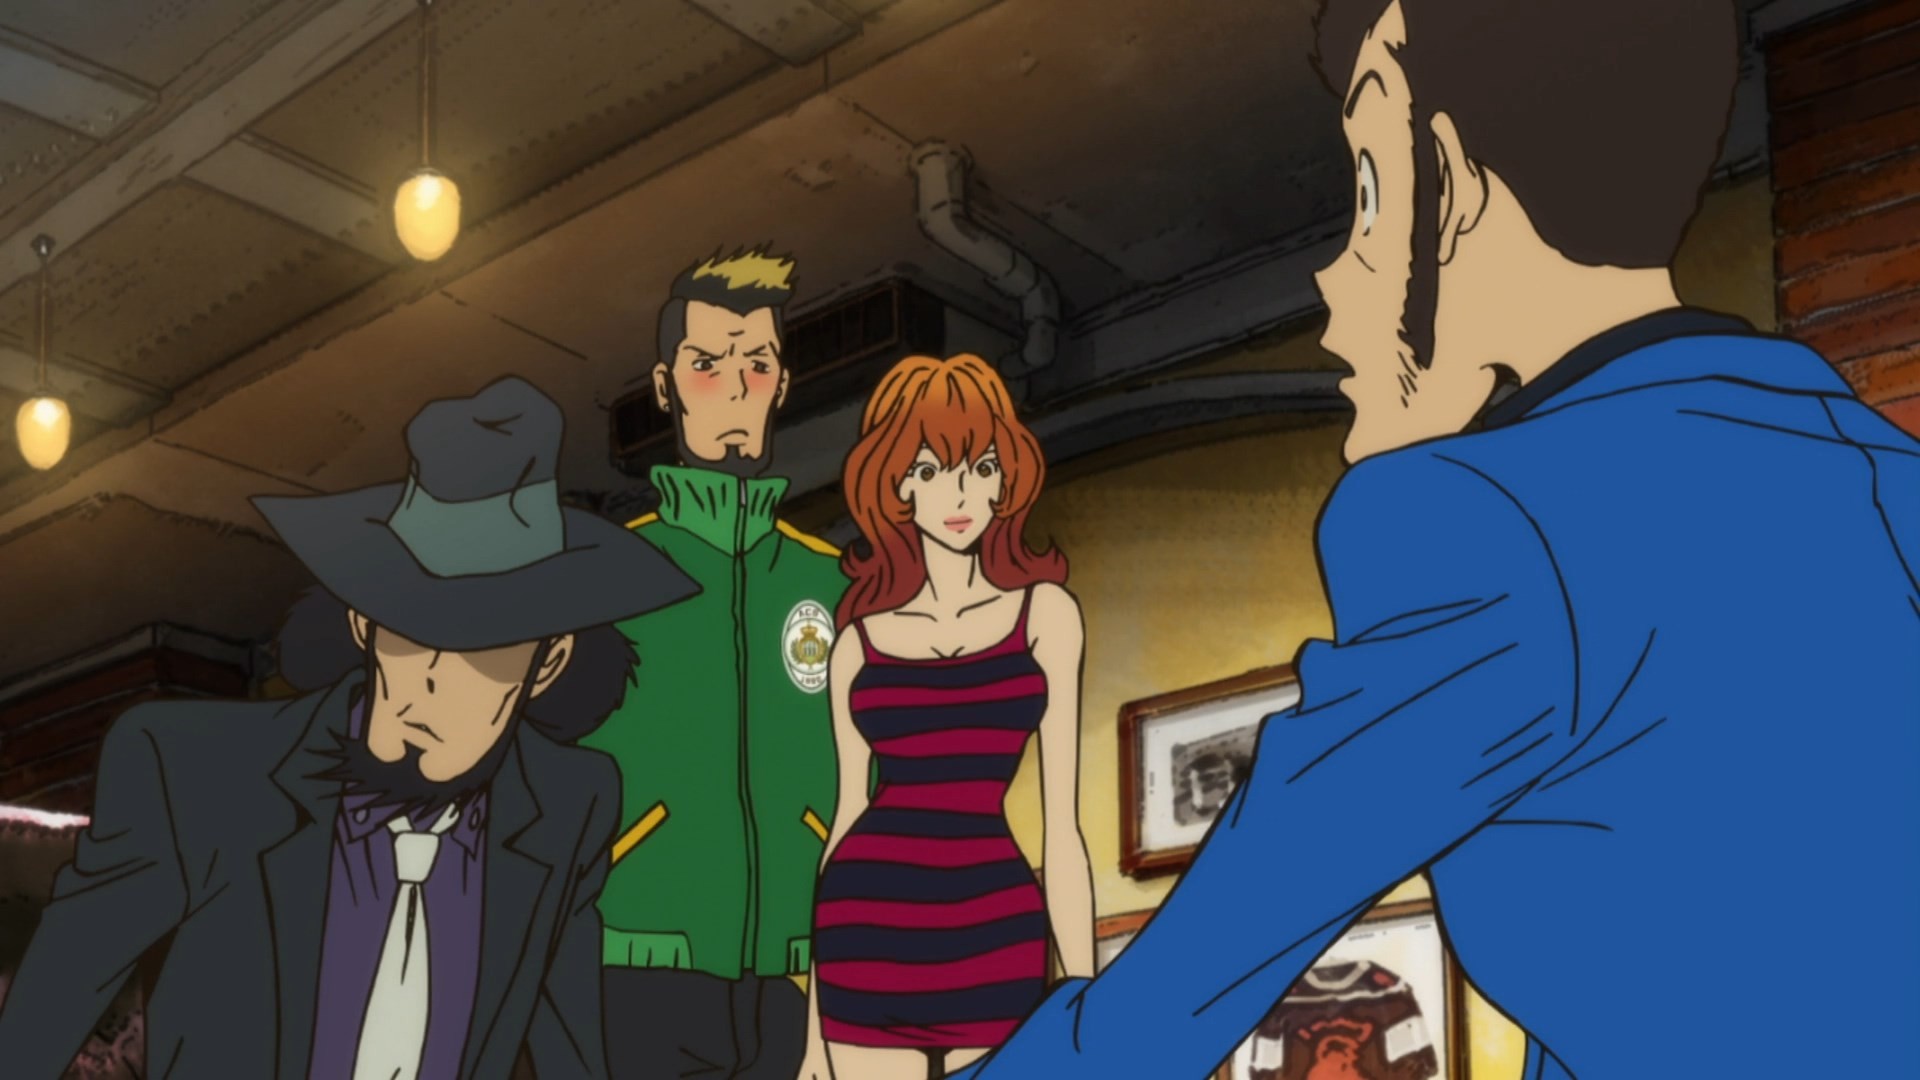 1920x1080 Lupin the Third PART4 02